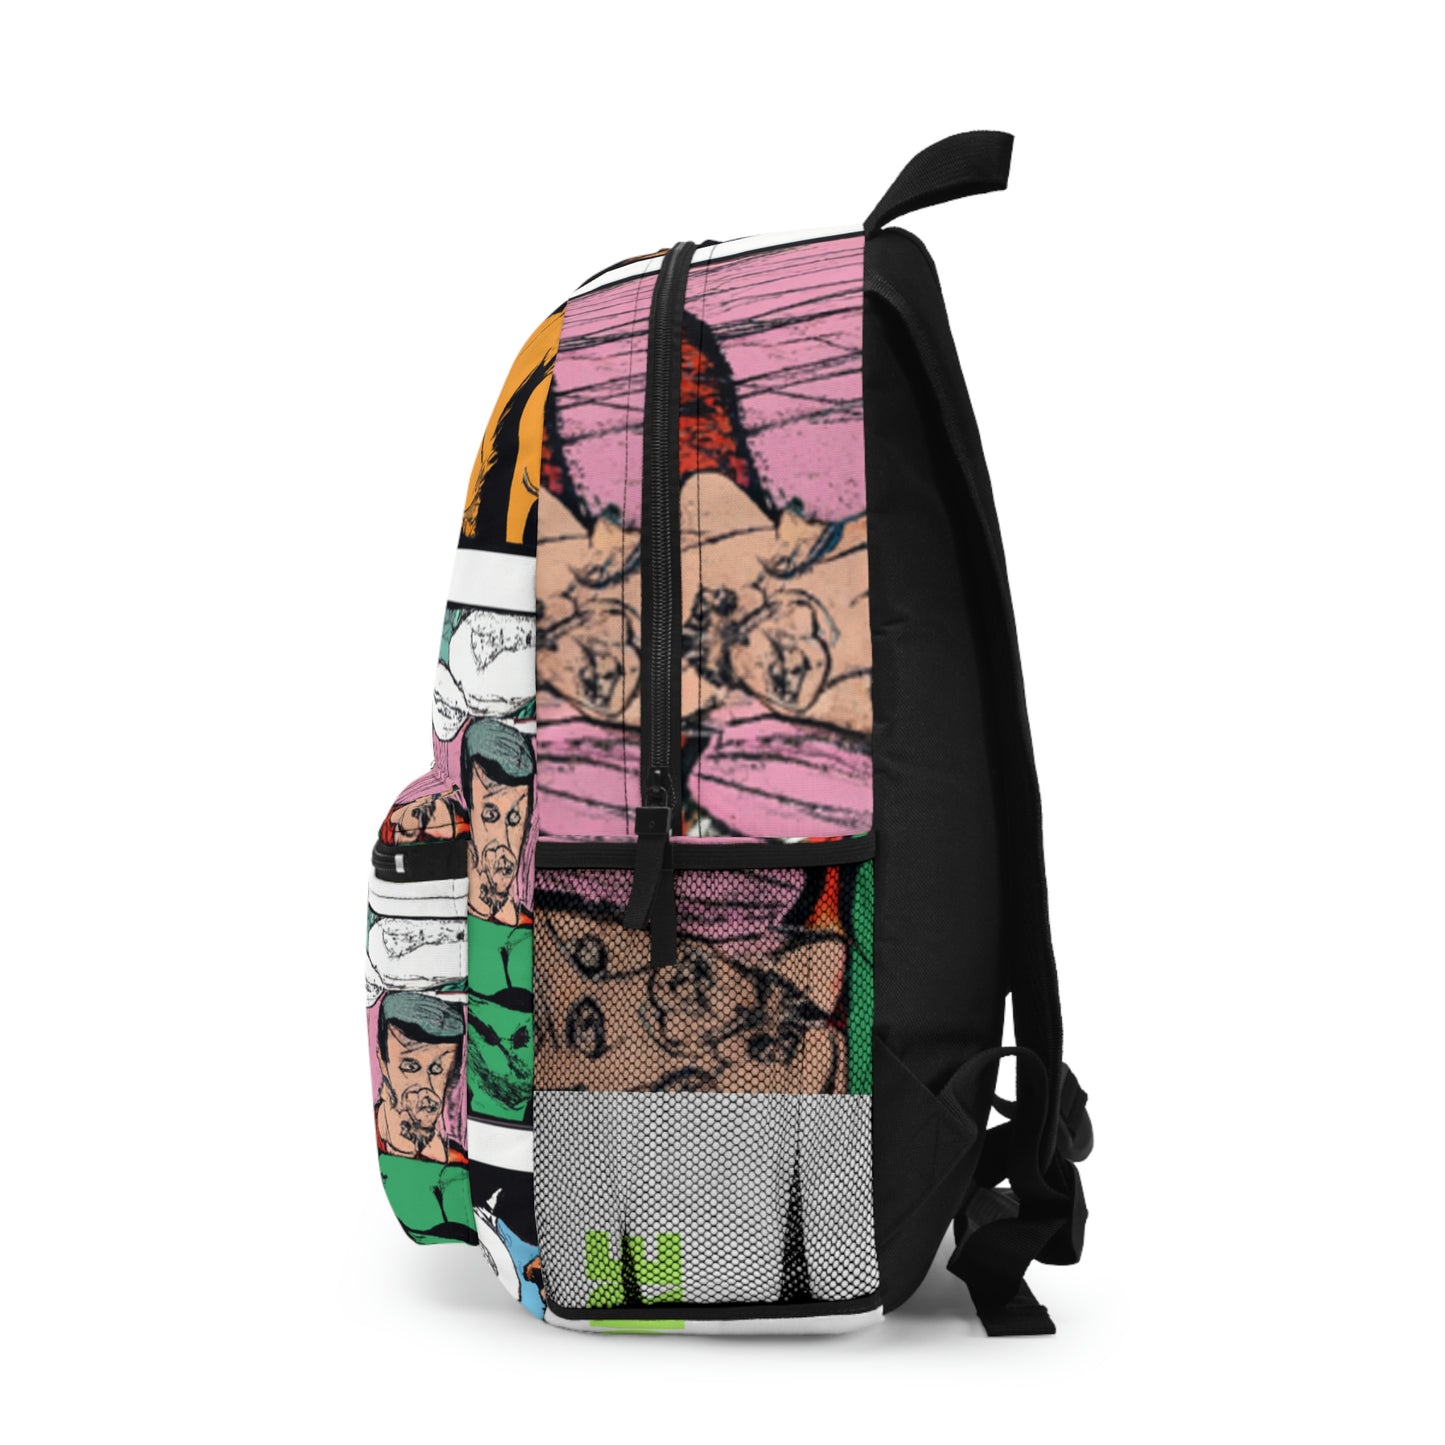 Mighty Magenta - Comic Book Backpack 1 of 1 Collectible